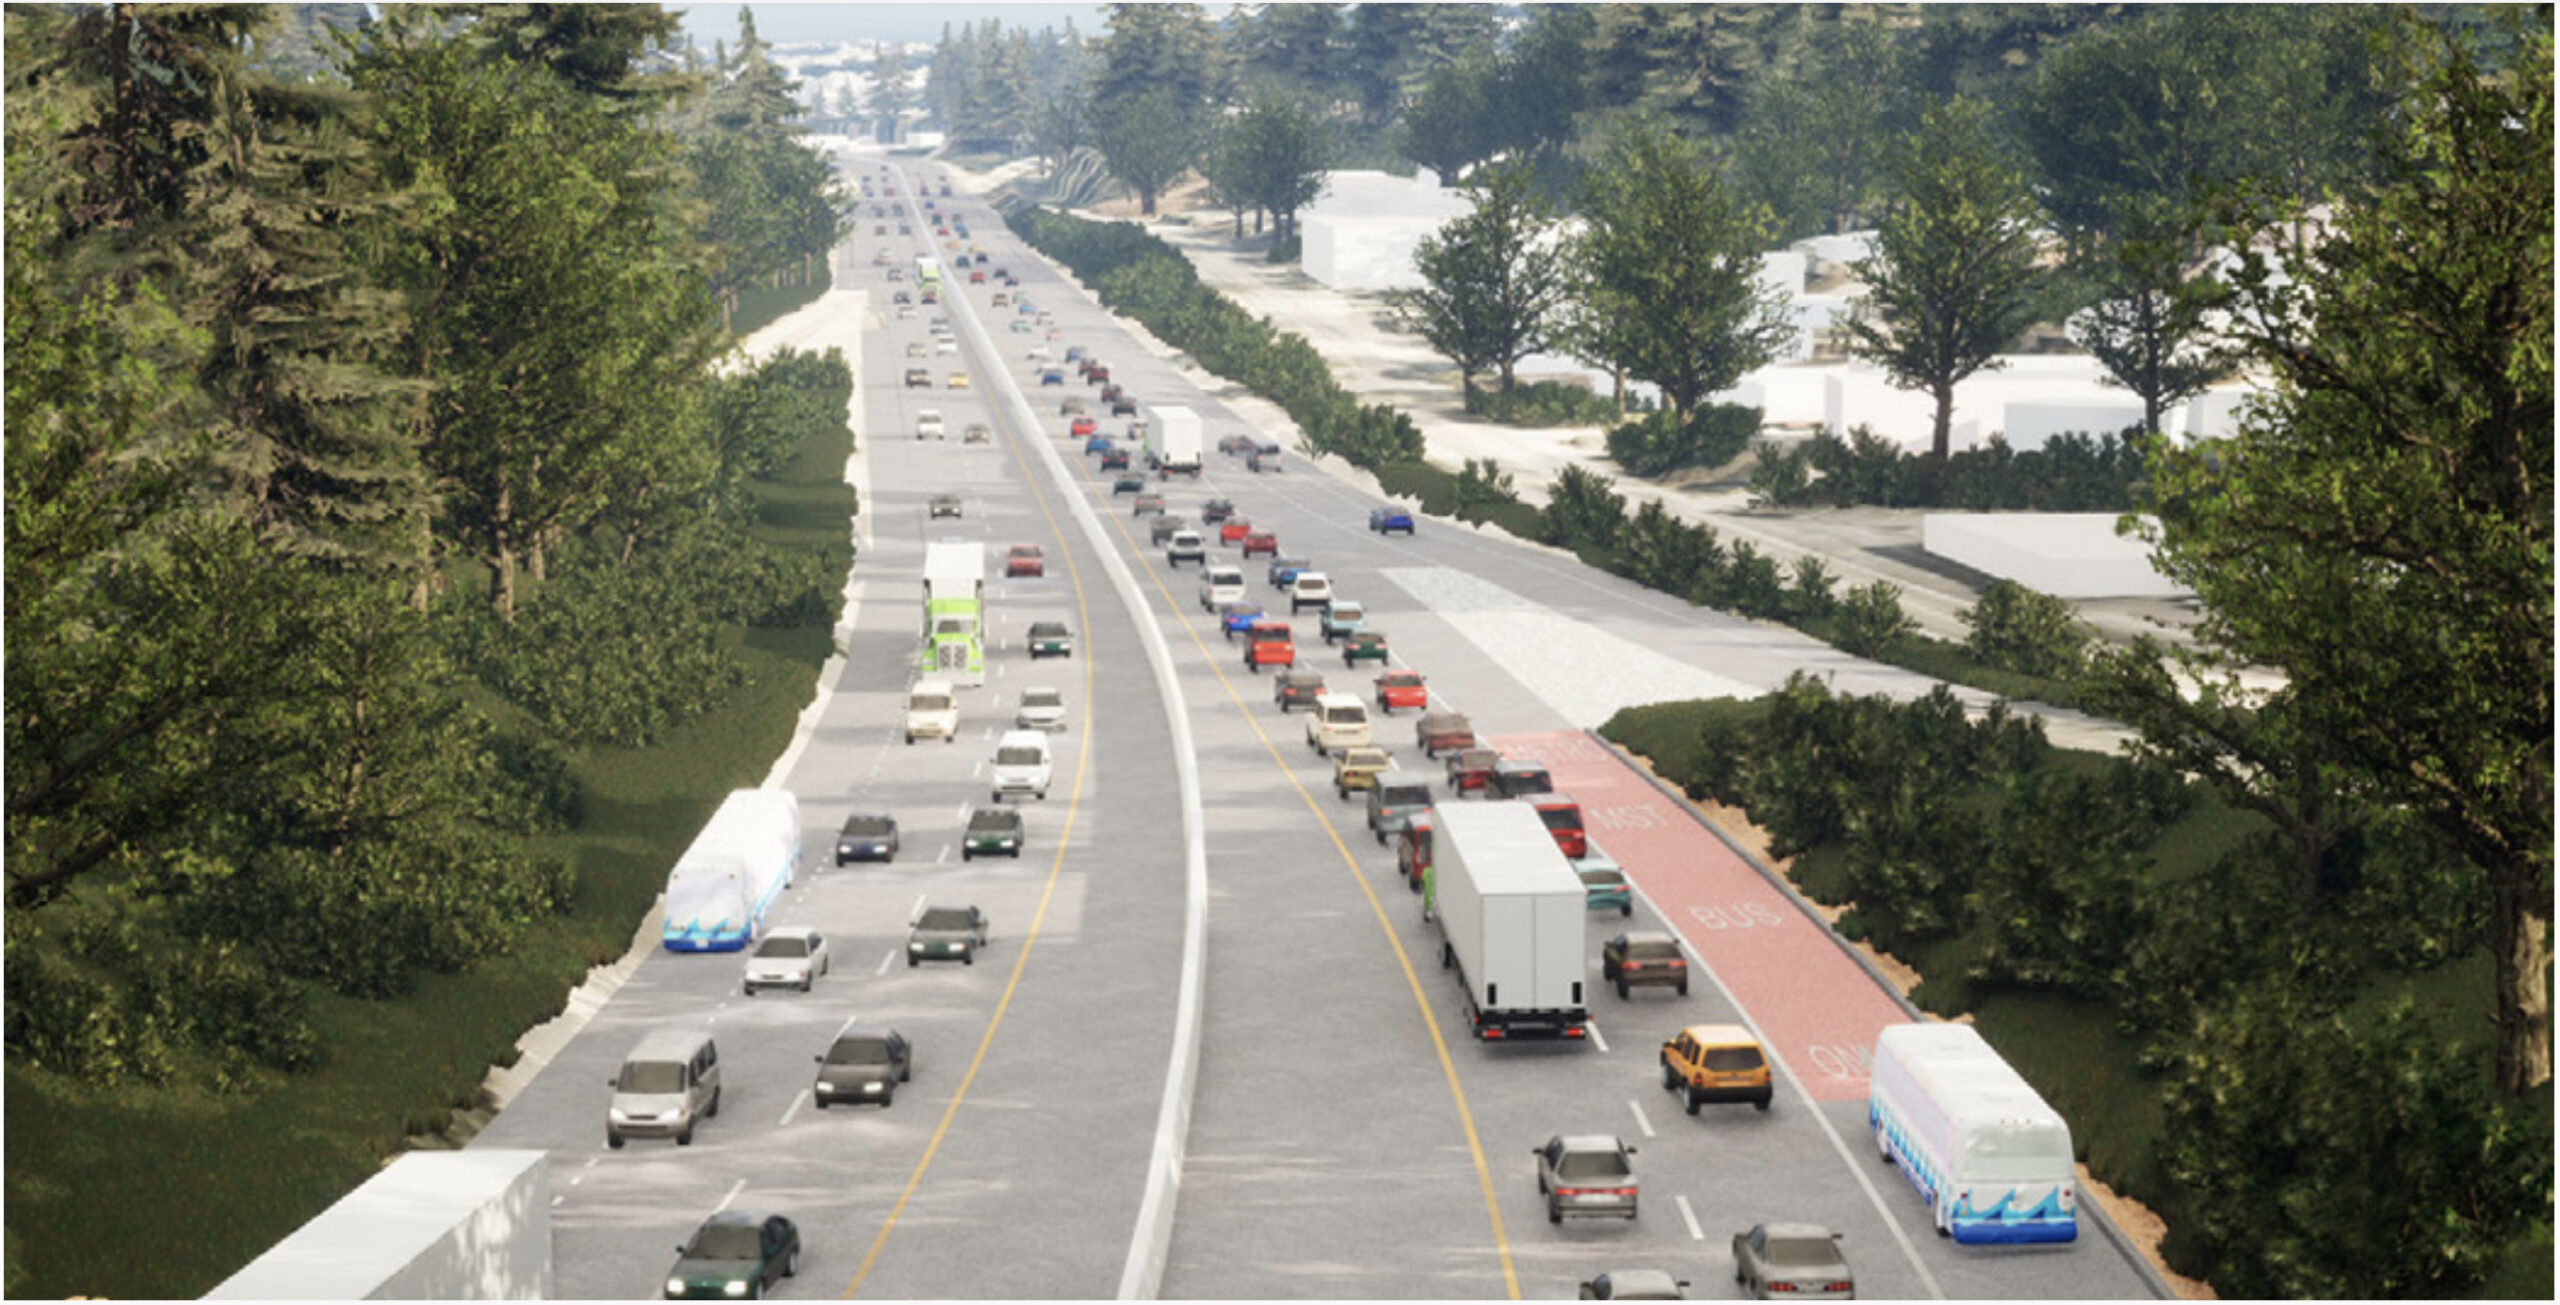 A rendering shows a bus-on-shoulder design included in Highway 1 improvements through Santa Cruz County.